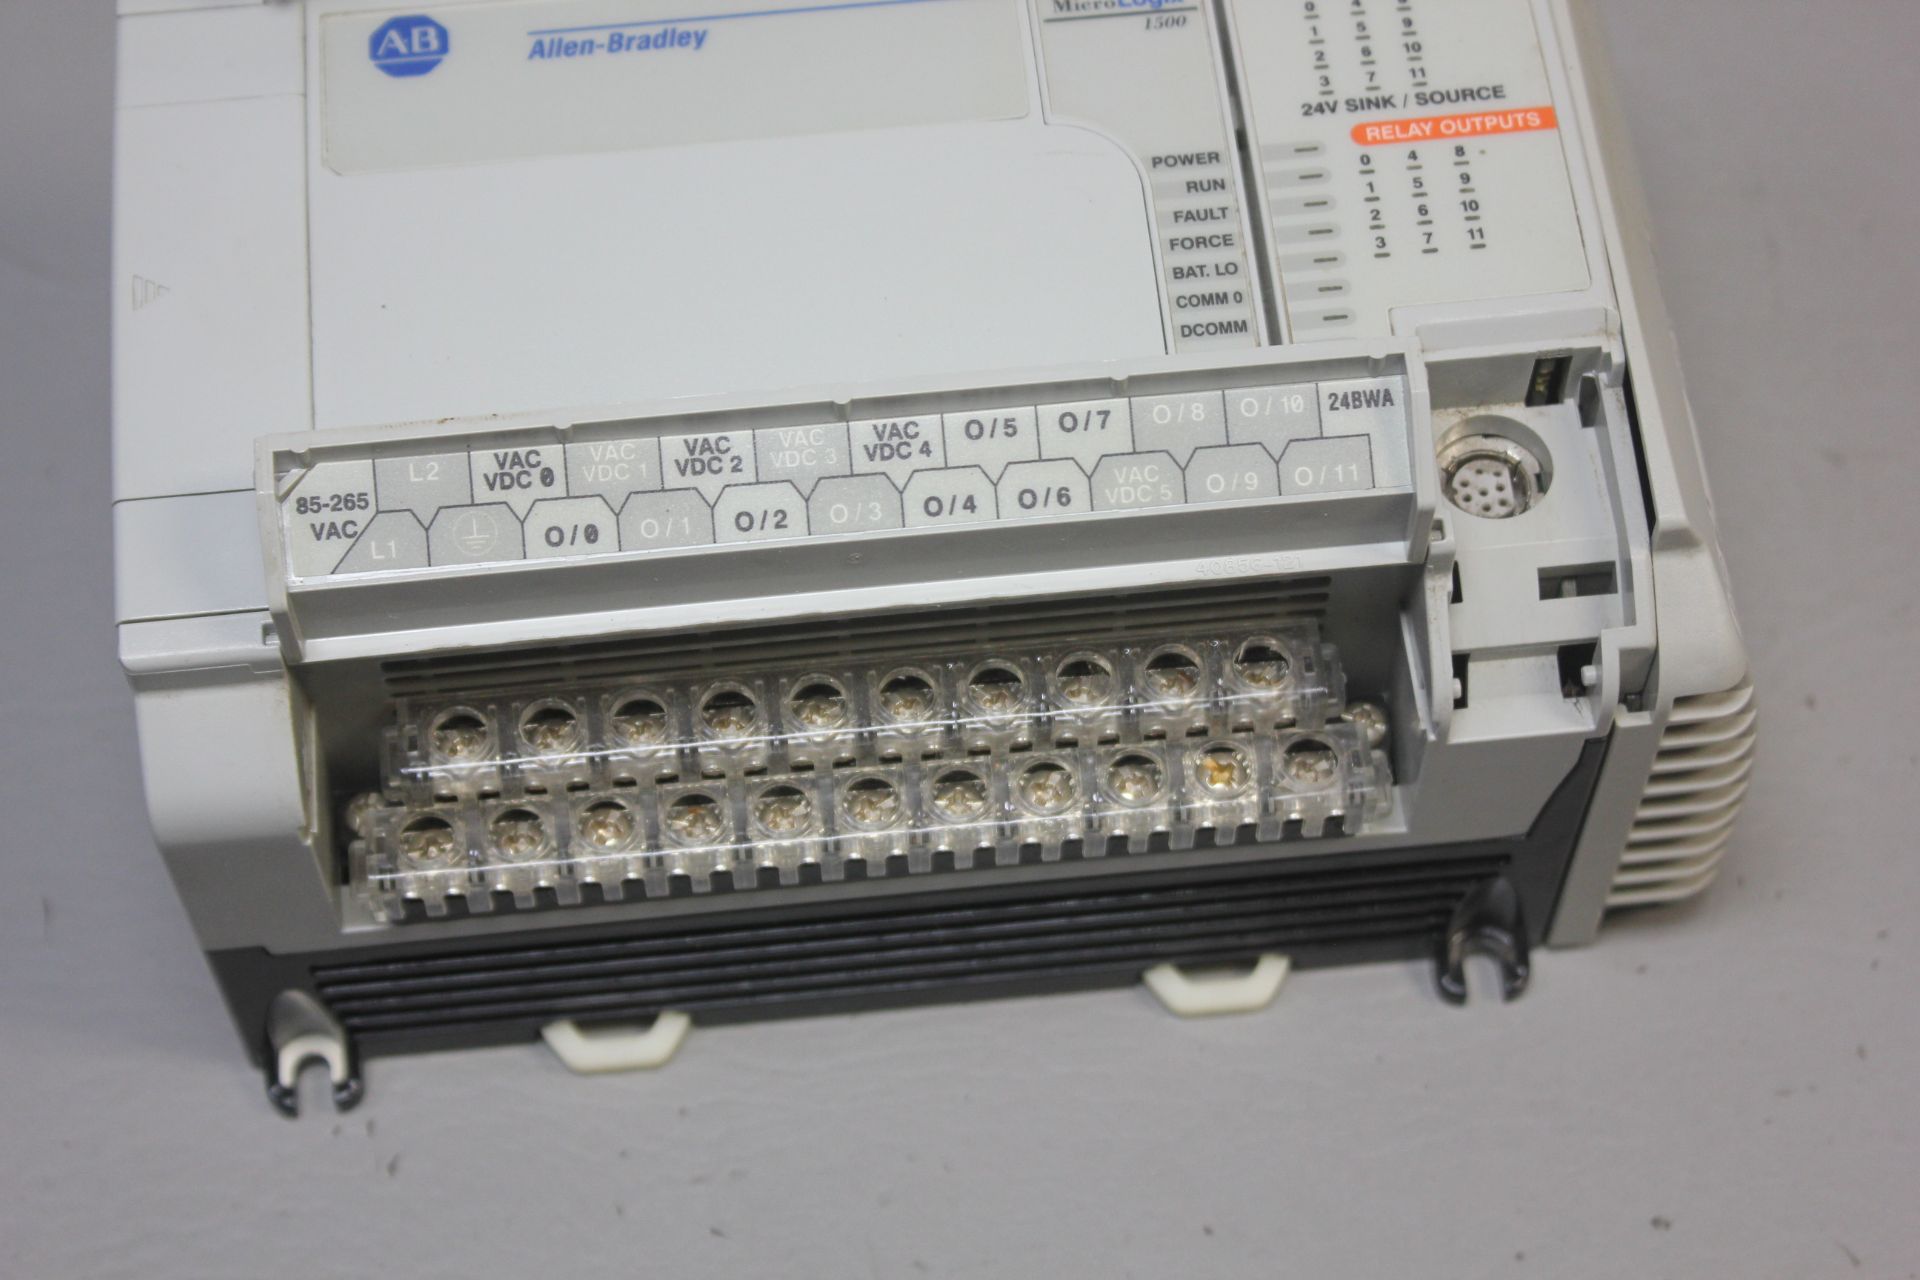 ALLEN BRADLEY MICROLOGIX 1500 CPU WITH BASE UNIT - Image 3 of 10